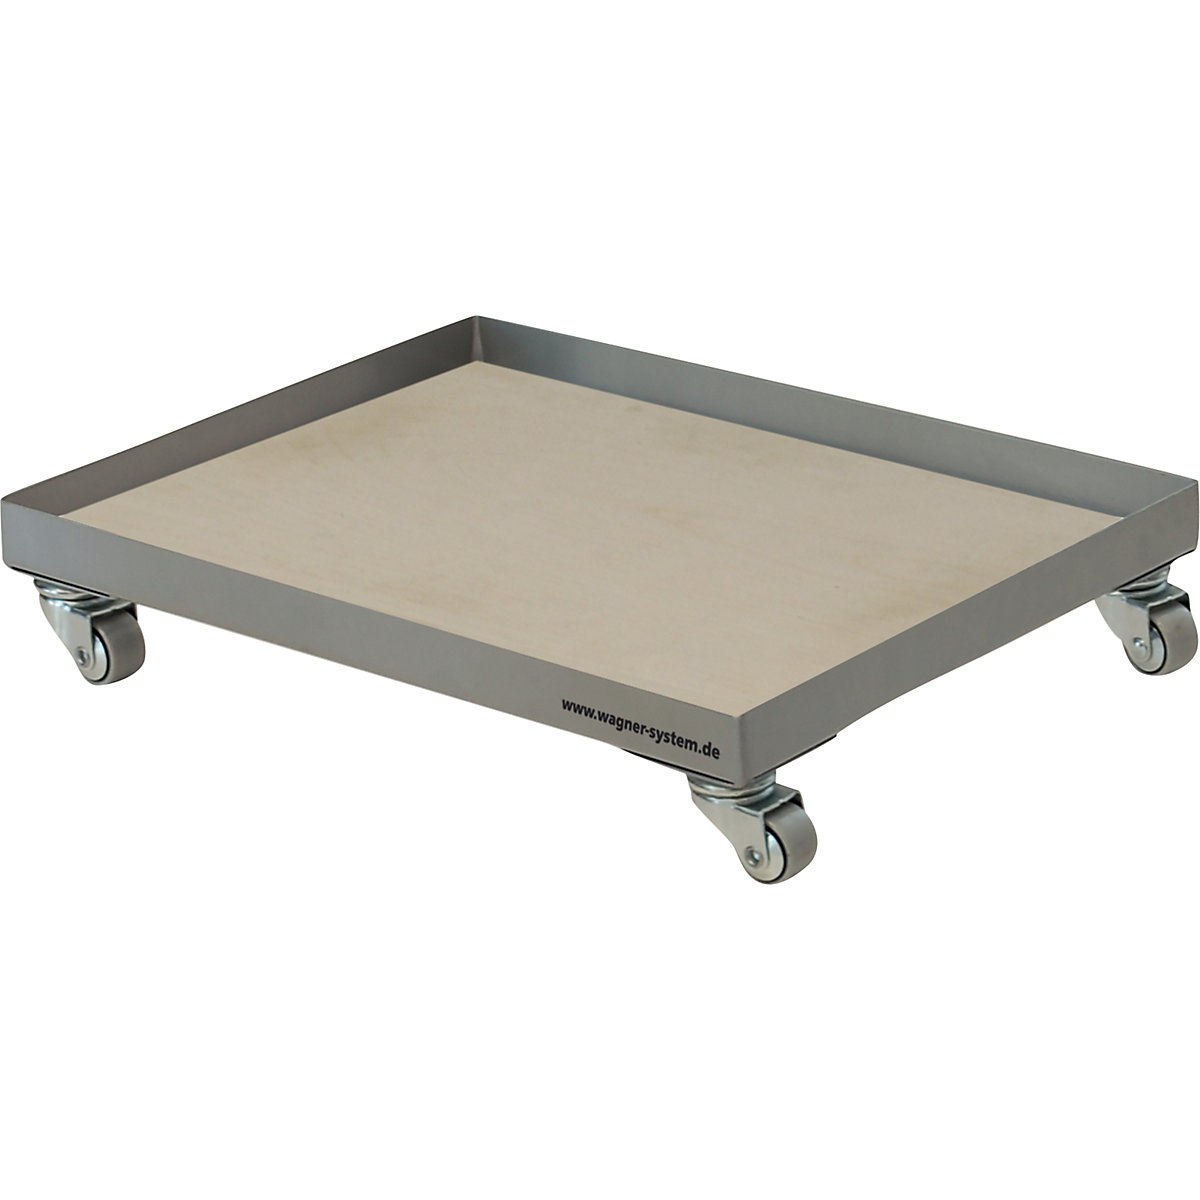 BOTTLE BUTLER transport dolly – Wagner, MM 1184, LxW 400 x 300 mm, max. load 100 kg, 2+ items-4